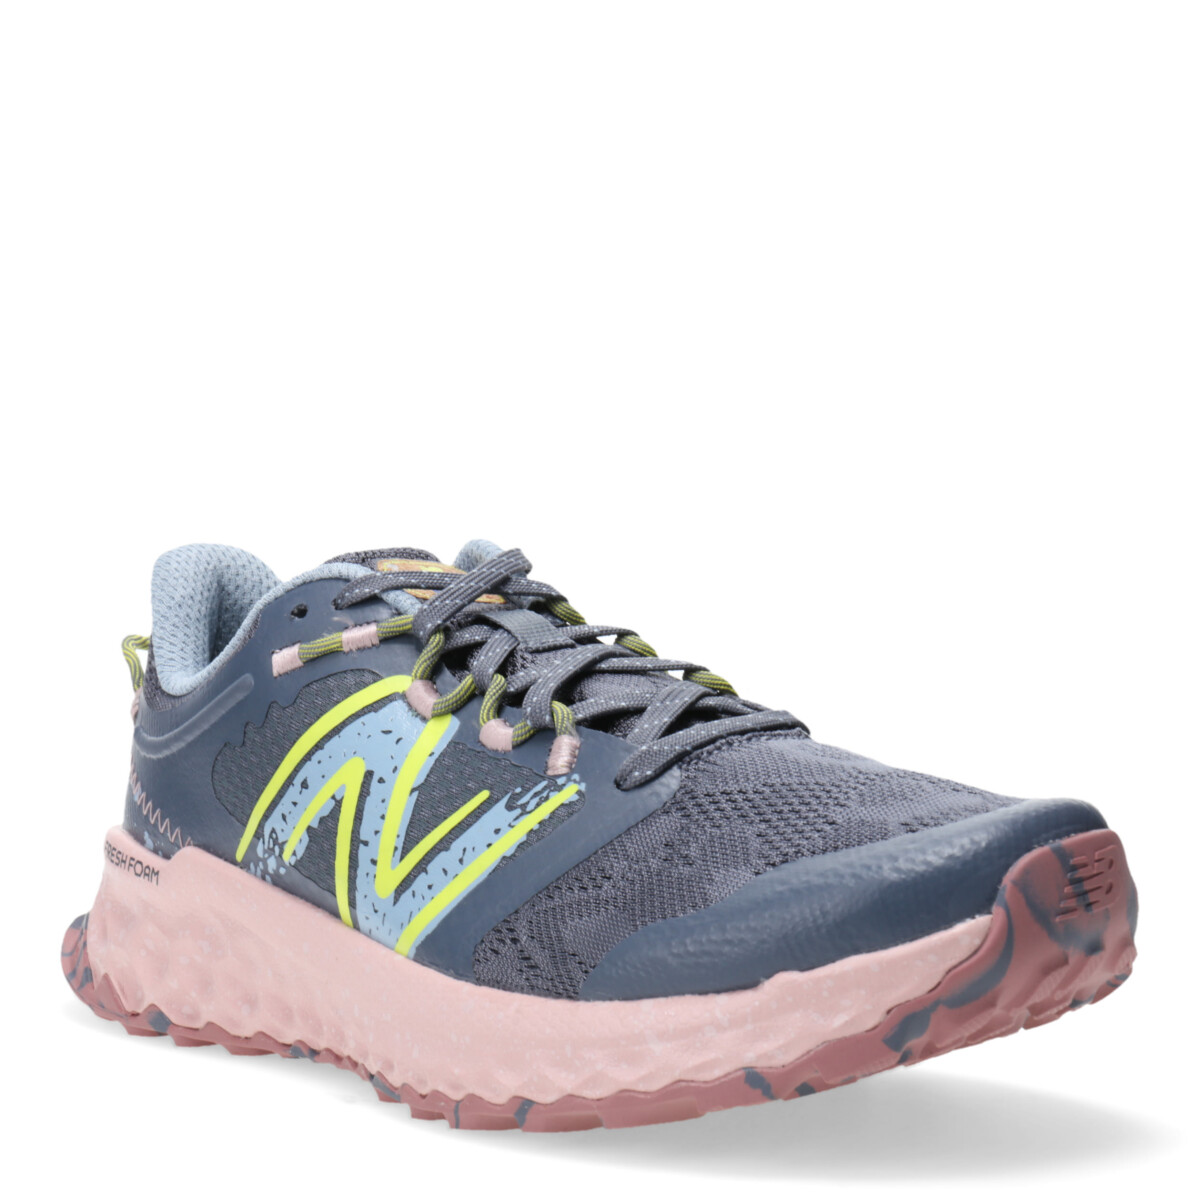 Trail Running Wns New Balance - Gris Oscuro/Rosa/Celeste 